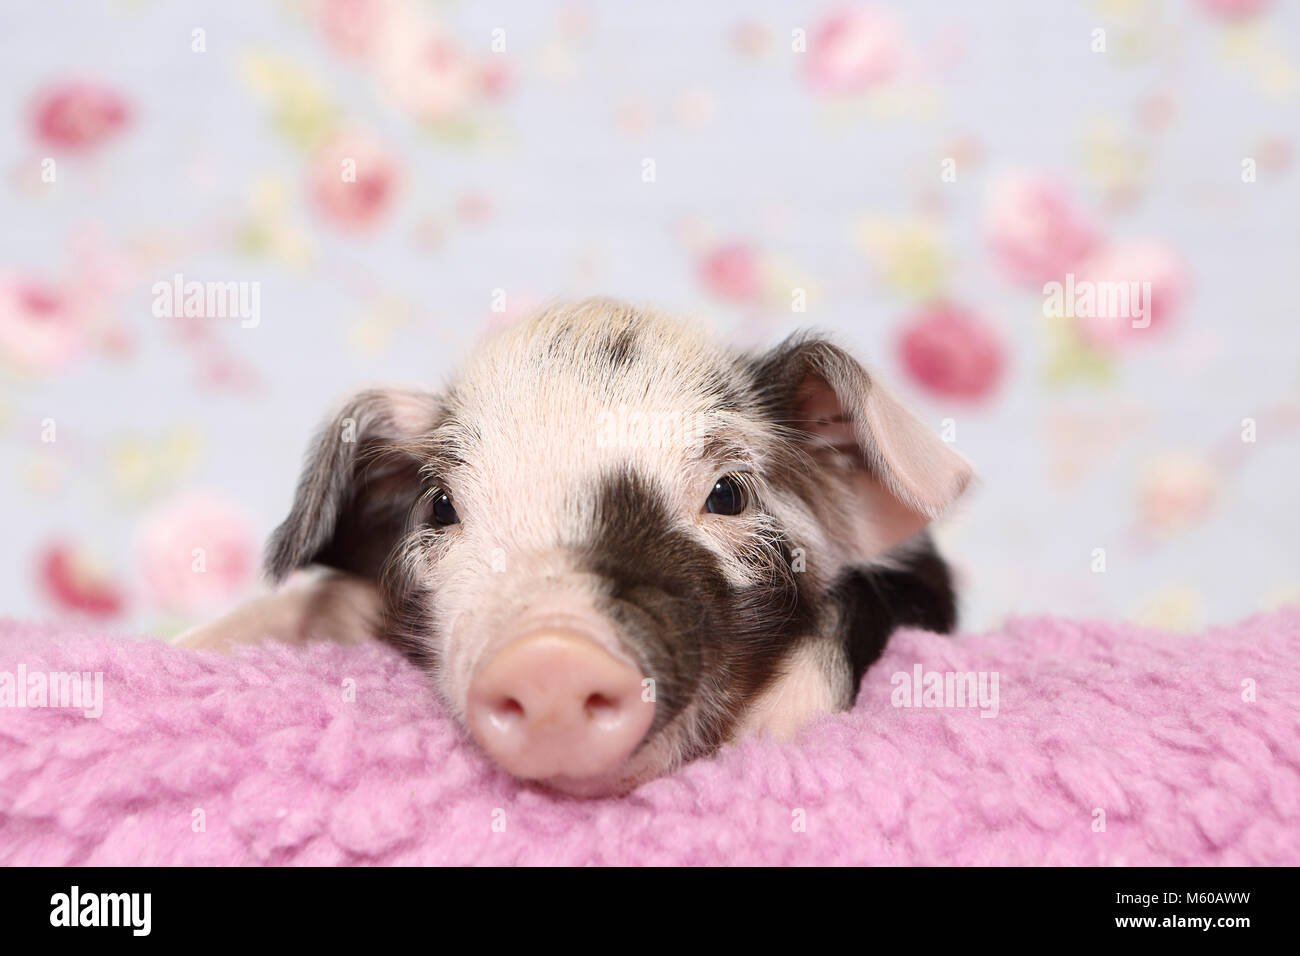 Domestic Pig, Turopolje x ?. Piglet (1 week old) lying on a pink blanket. Studio picture against a blue background with rose flower print. Germany Stock Photo